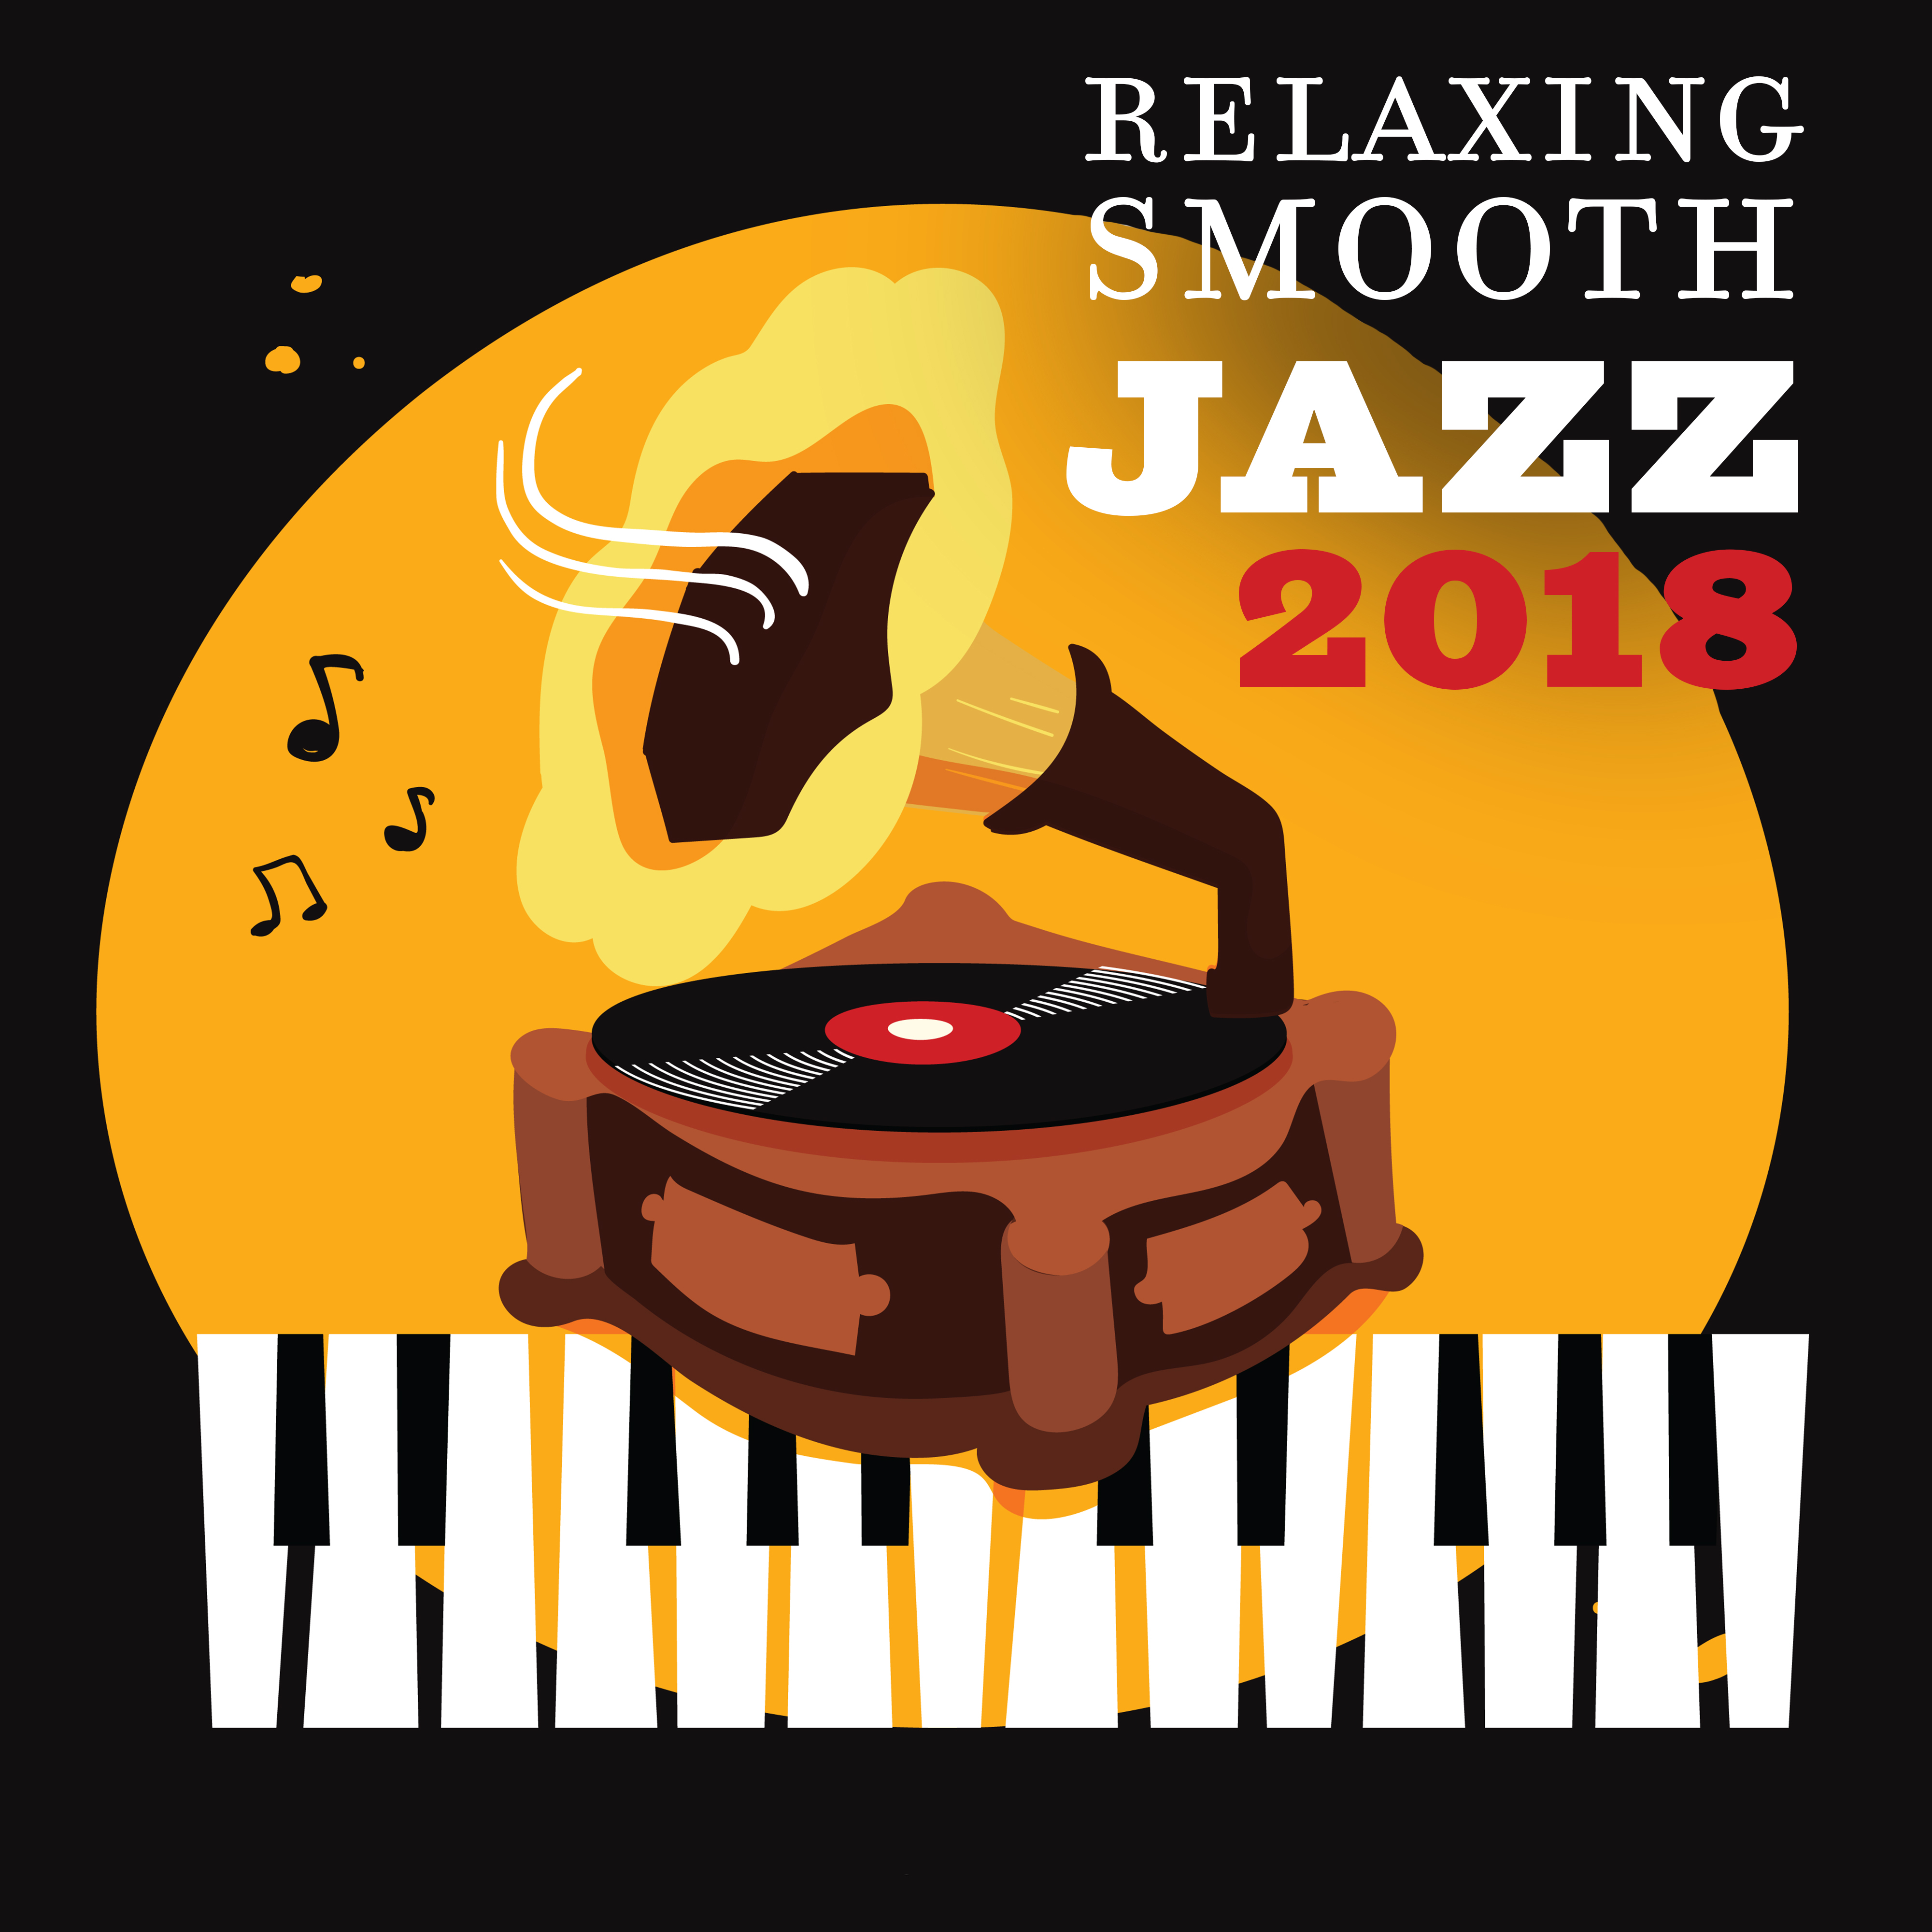 Relaxing Smooth Jazz 2018